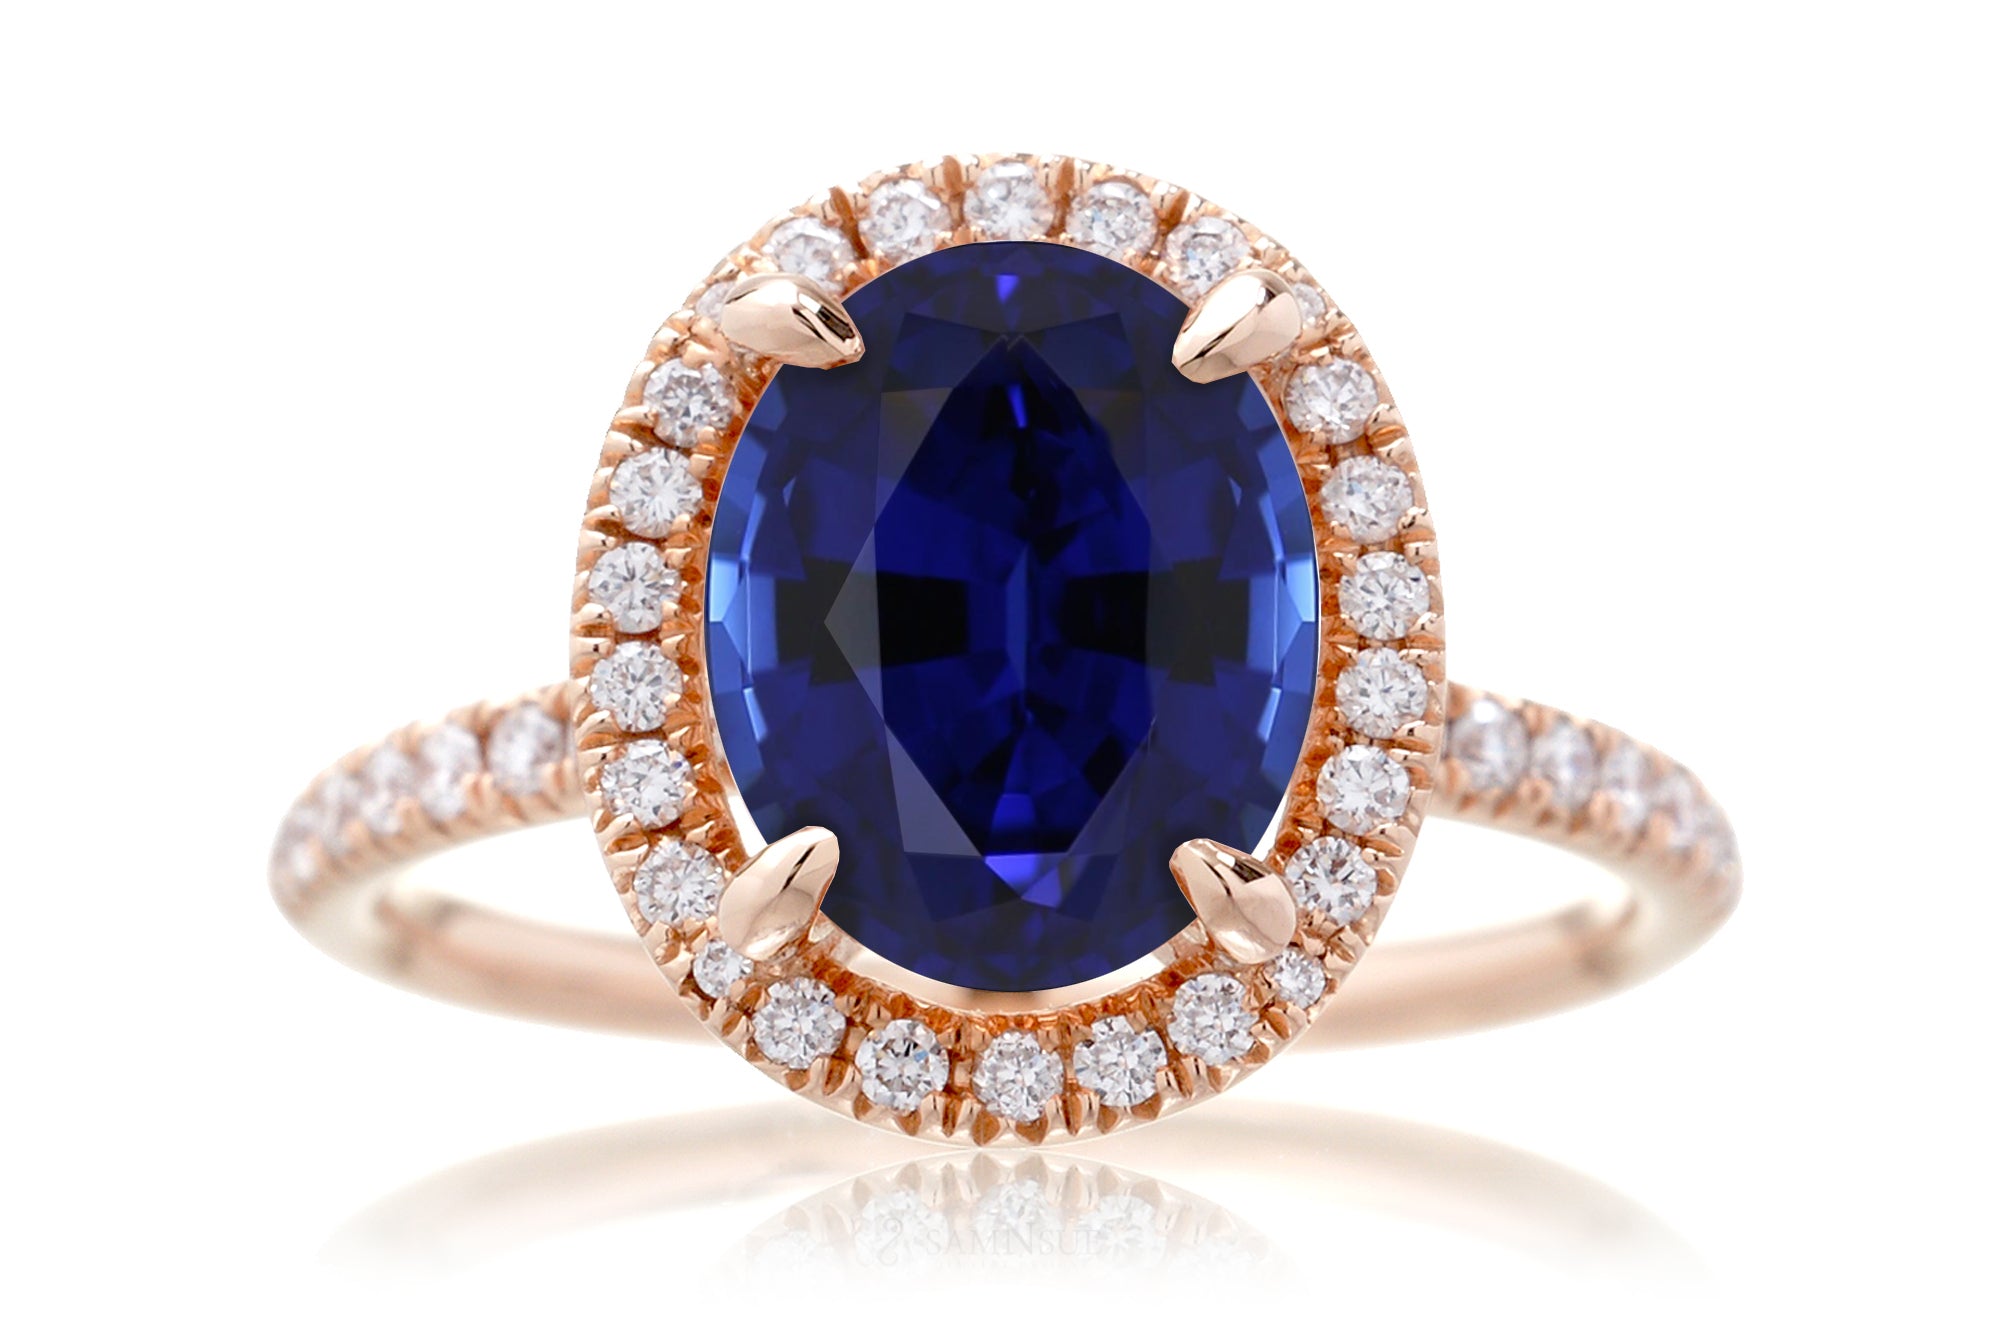 The Drenched Oval Lab-Grown Sapphire